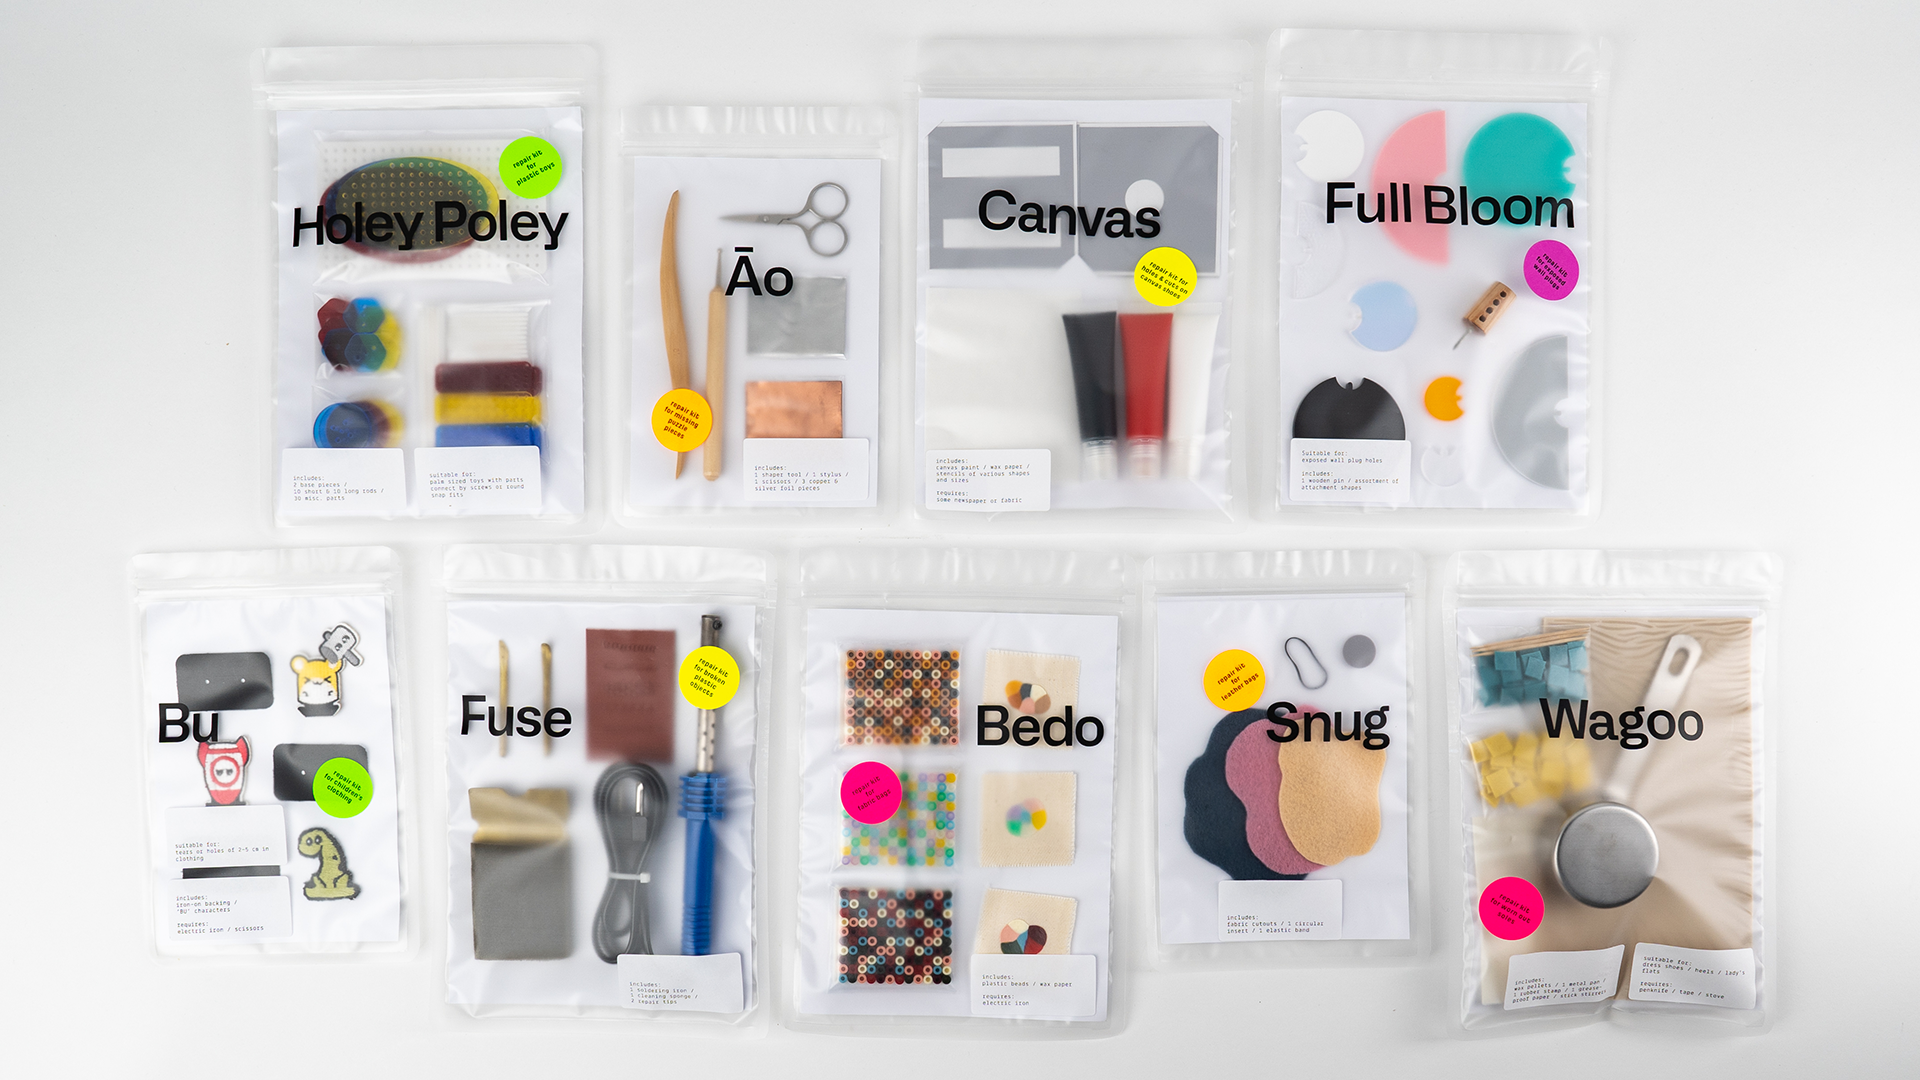 The project included nine repair kits designed by DID students with novel techniques for repair.